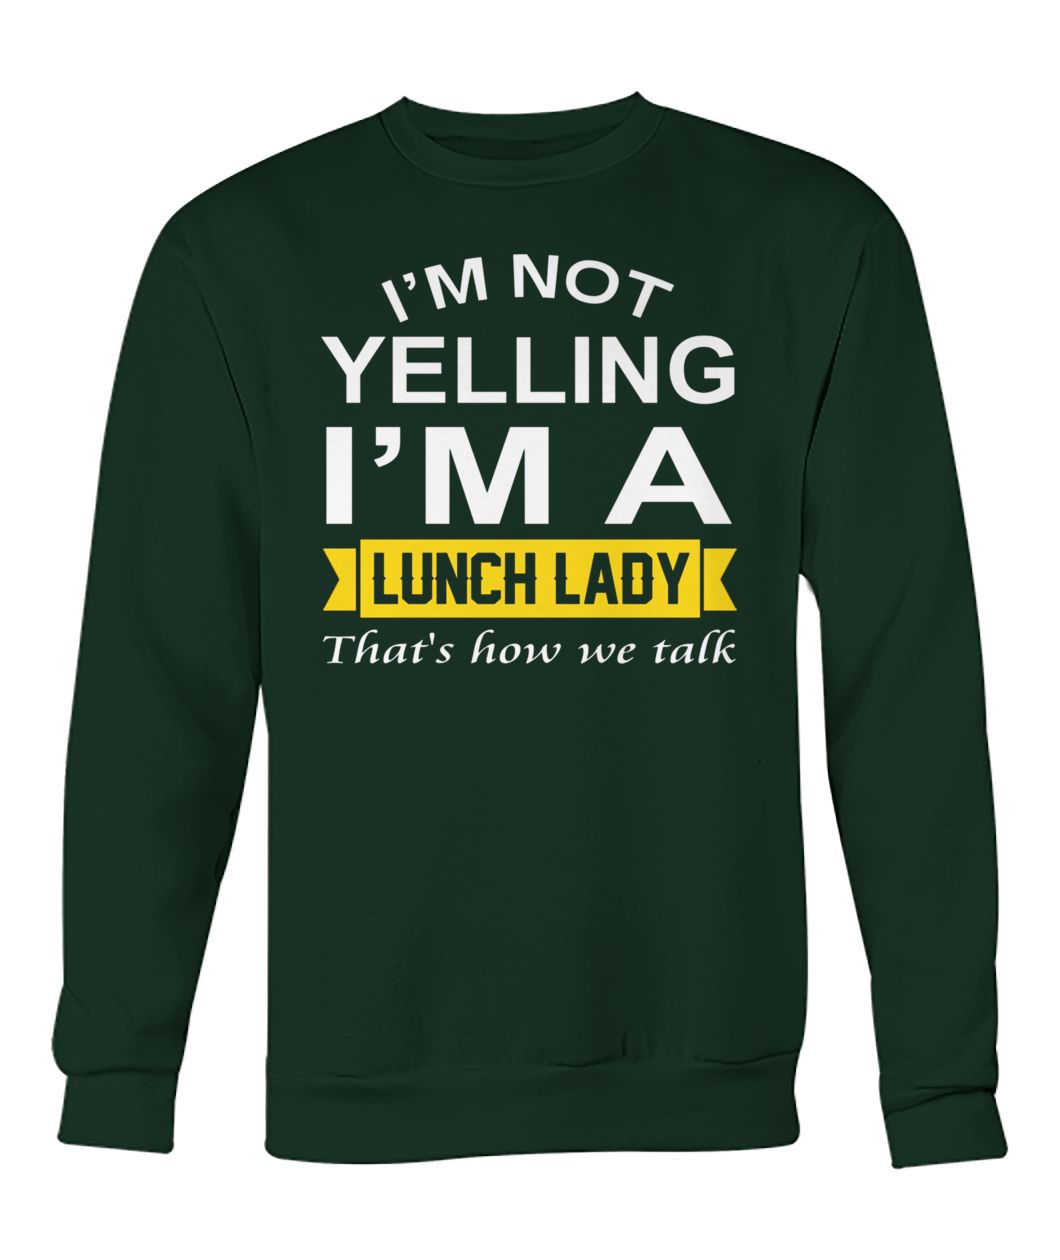 I'm not yelling I'm the lunch lady that's how we talk crew neck sweatshirt